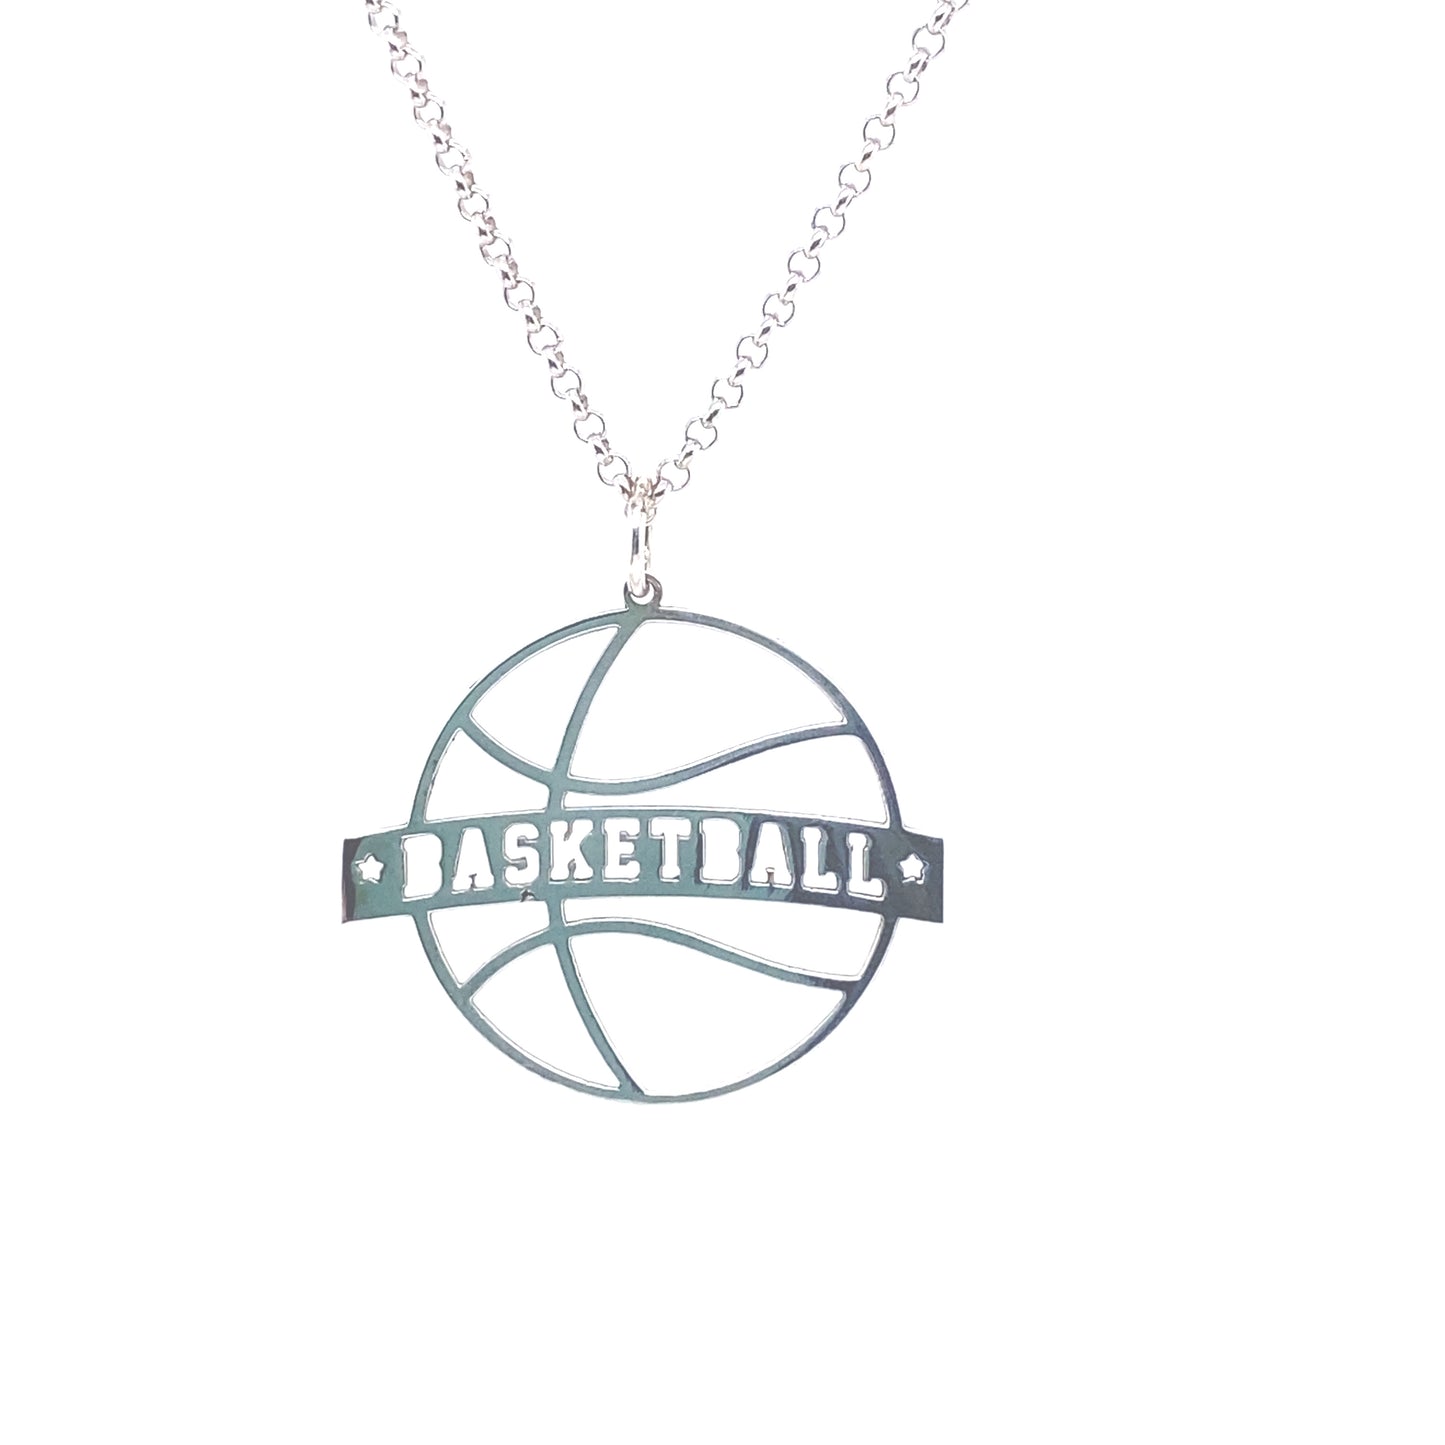 Basketball Silver Pendant | Luby Silver Collection | Luby 